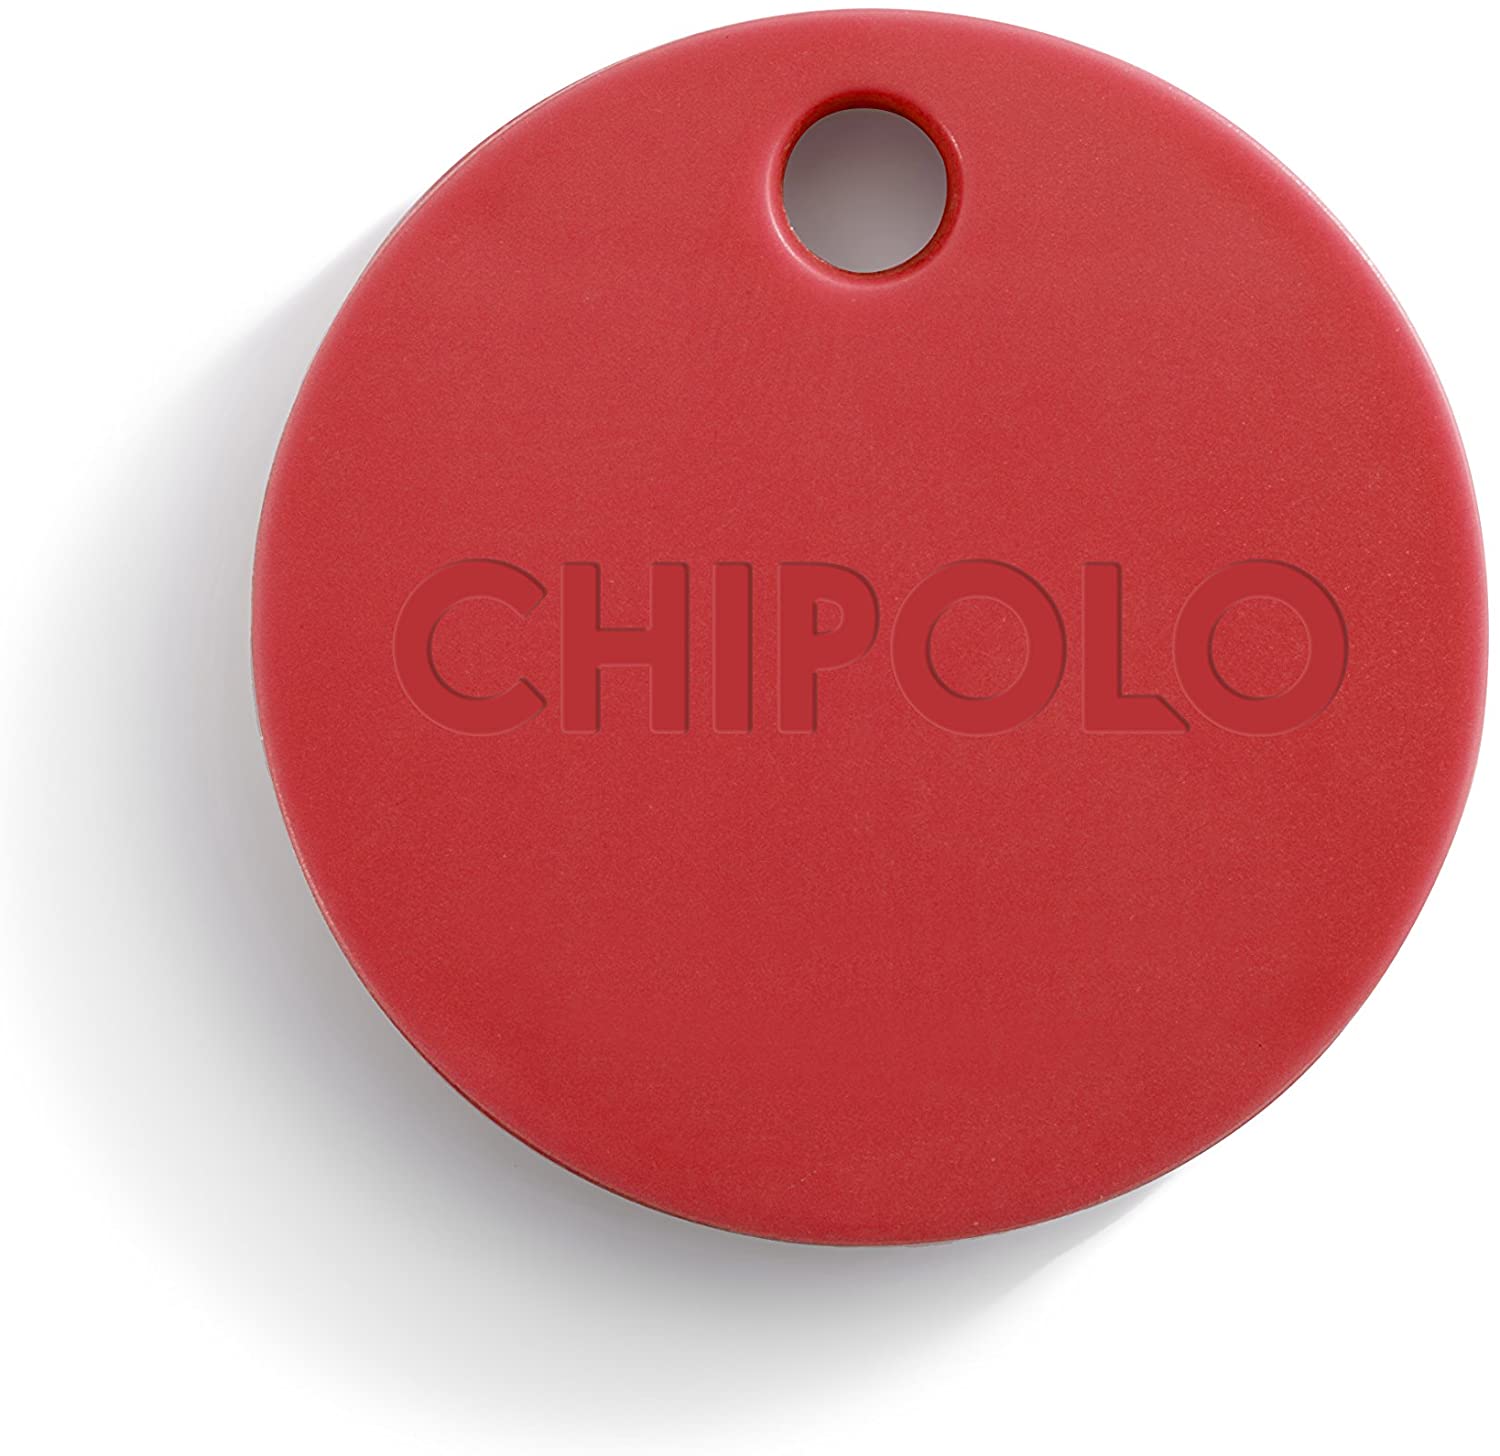 Chipolo CLASSIC Item Finder